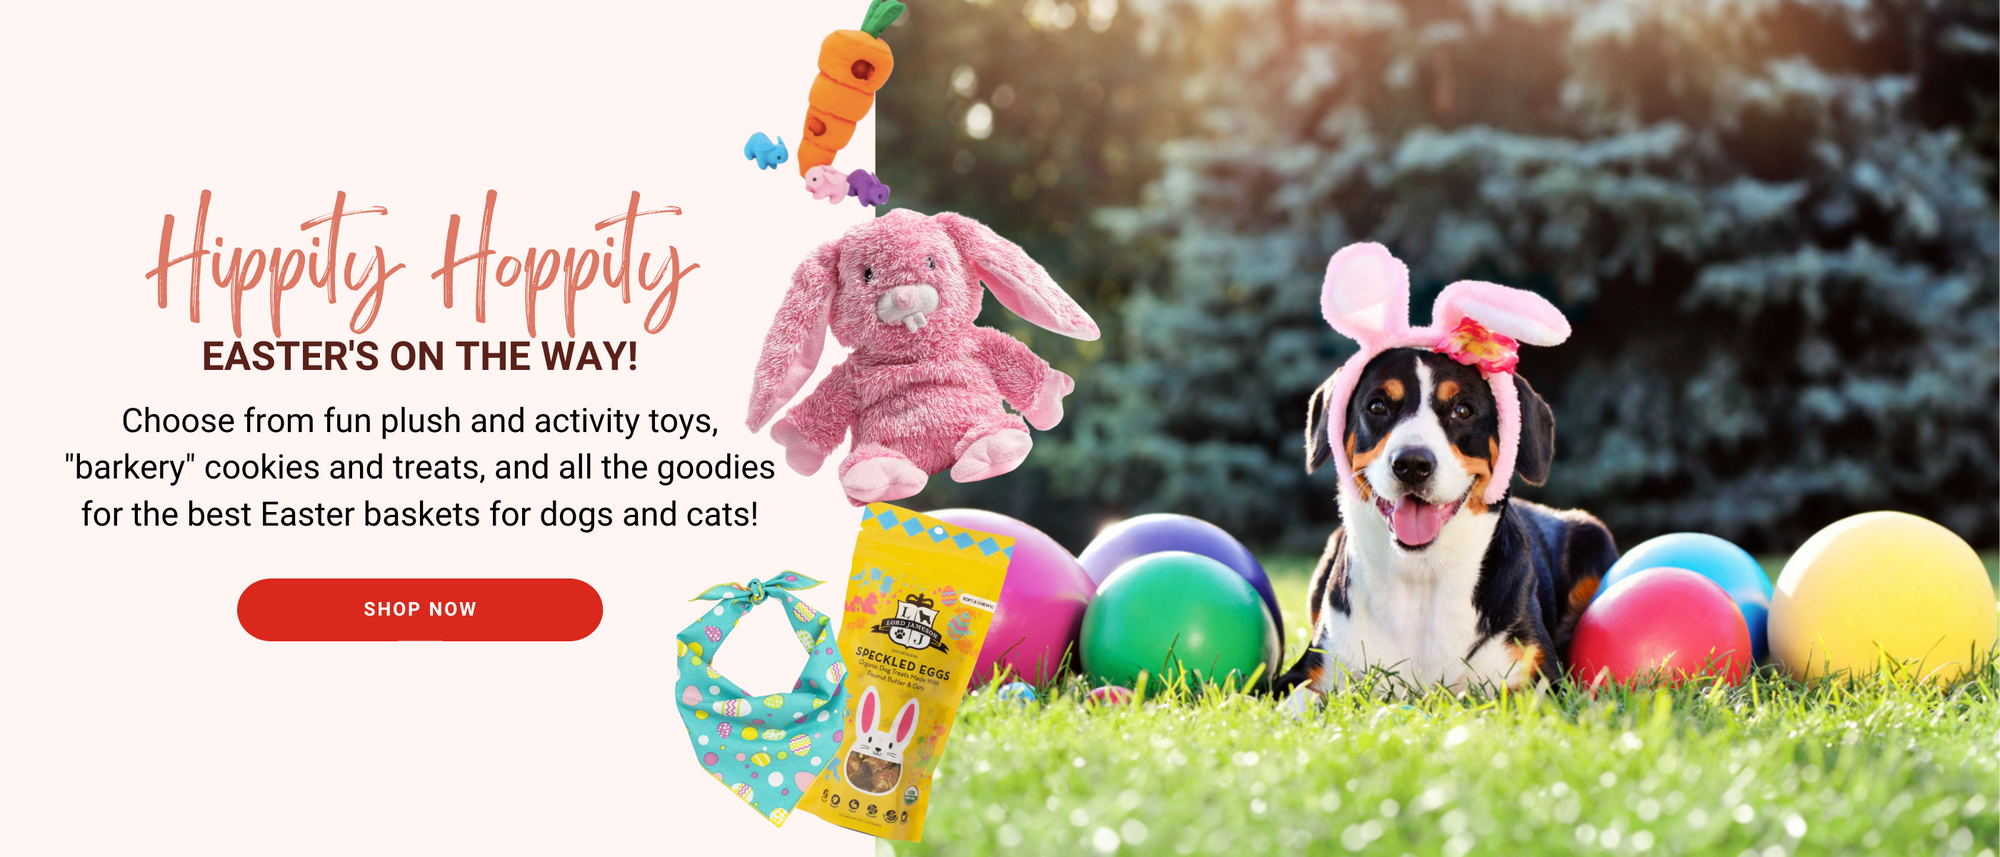 Hippity Hoppity! Easter's on the way! Shop our collection of fun plush and activity toys, "barkery" cookies and treats, and all the goodies for the best Easter baskets! Shop Now!